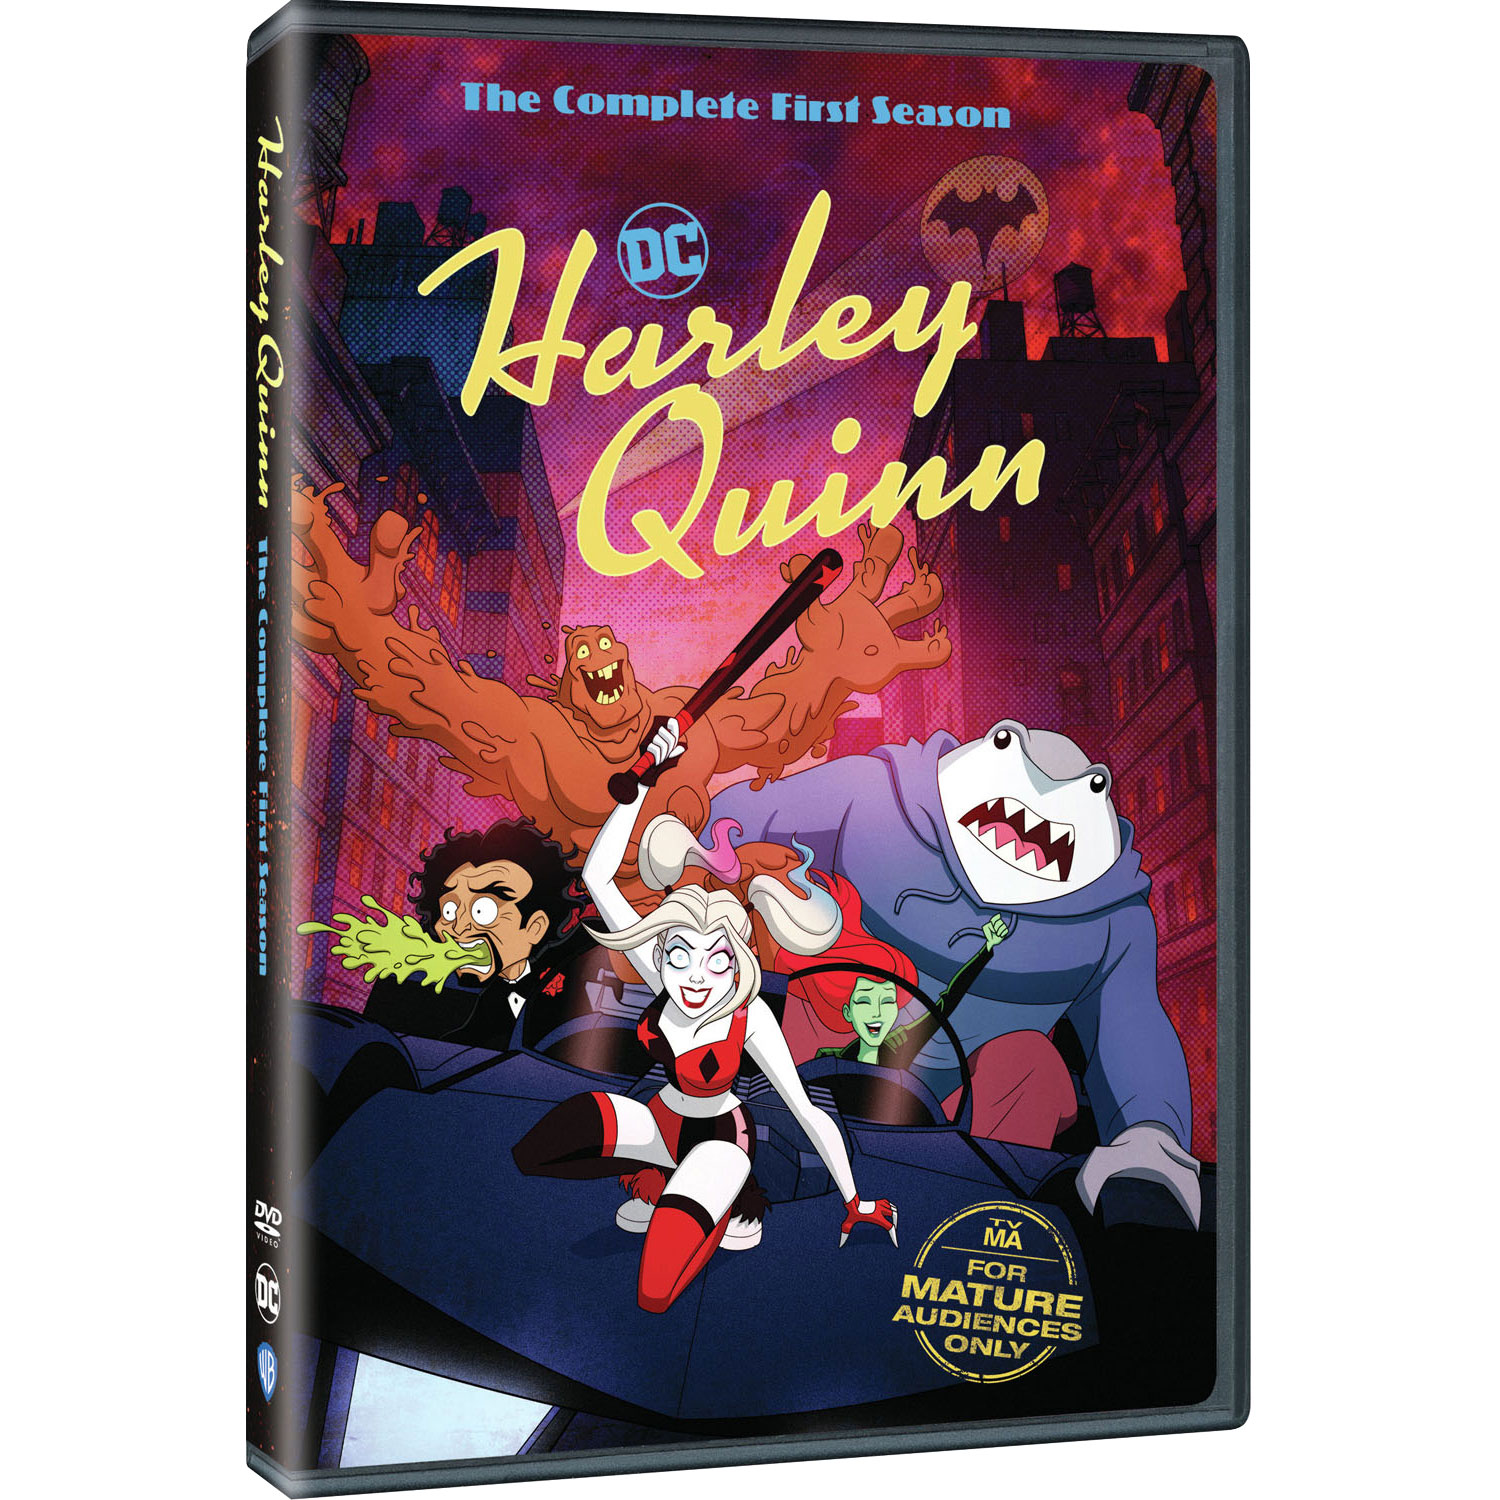 Harley Quinn: The Complete First Season (English)